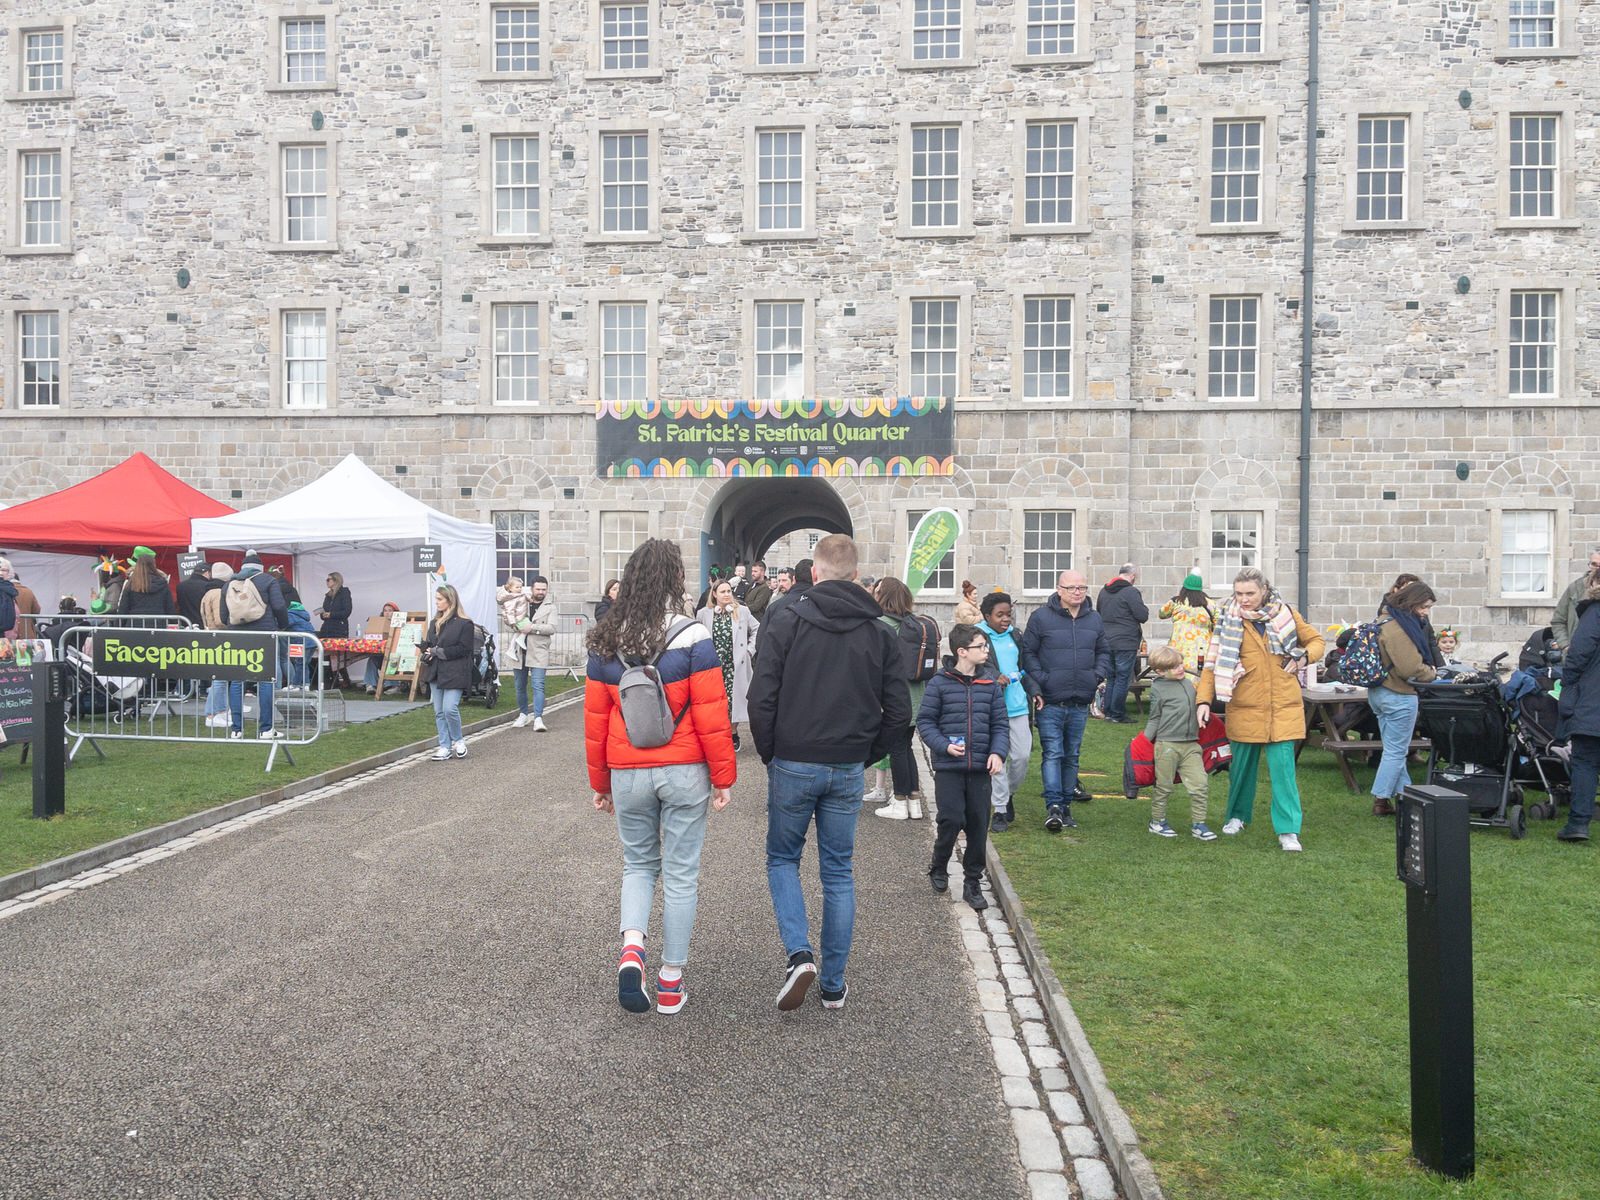 ST. PATRICK'S FESTIVAL QUARTER AT THE NATIONAL MUSEUM OF IRELAND 001